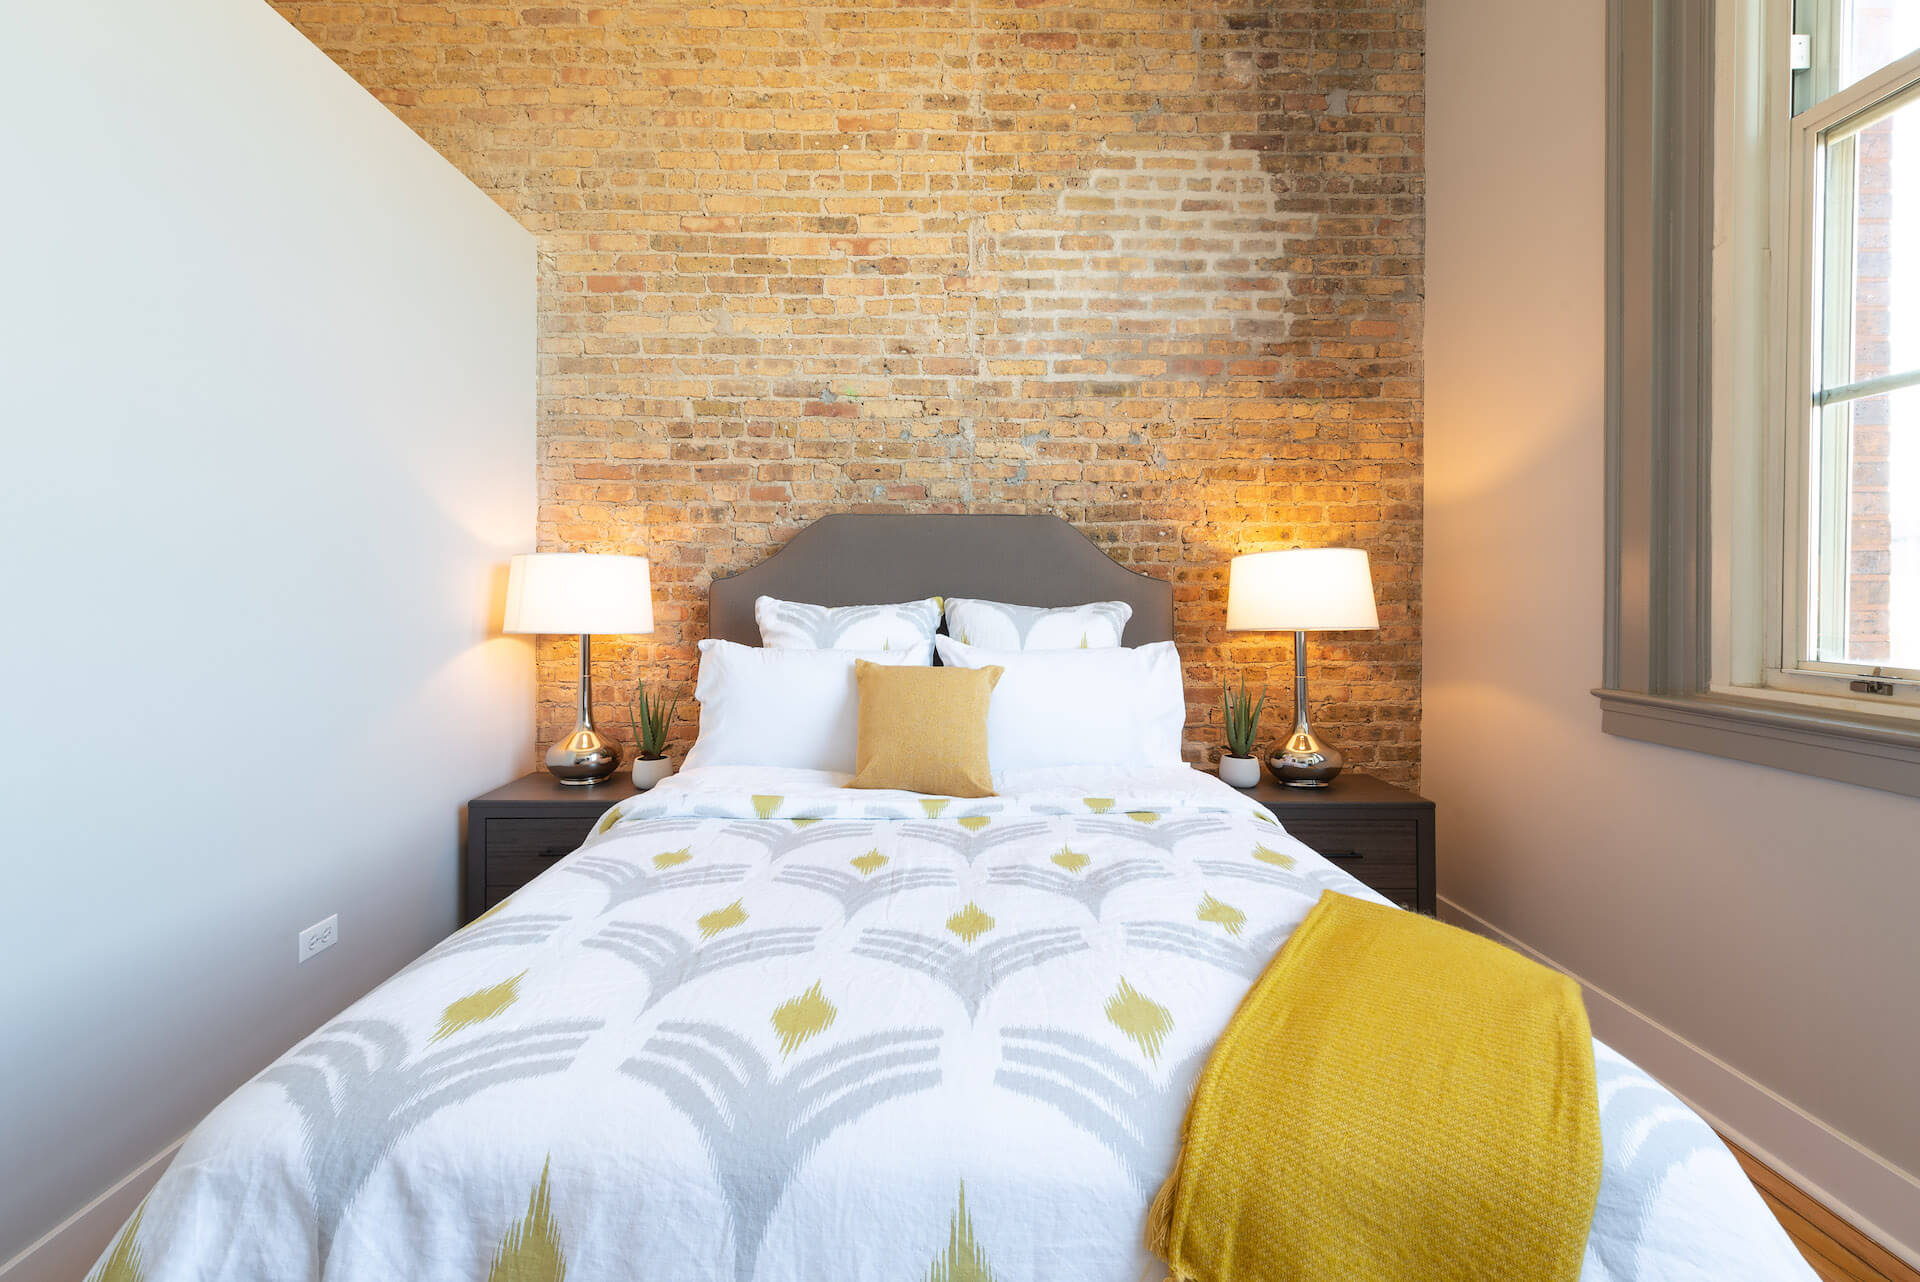 Main bedroom with wood flooring, large window, high ceiling, and exposed brick wall.